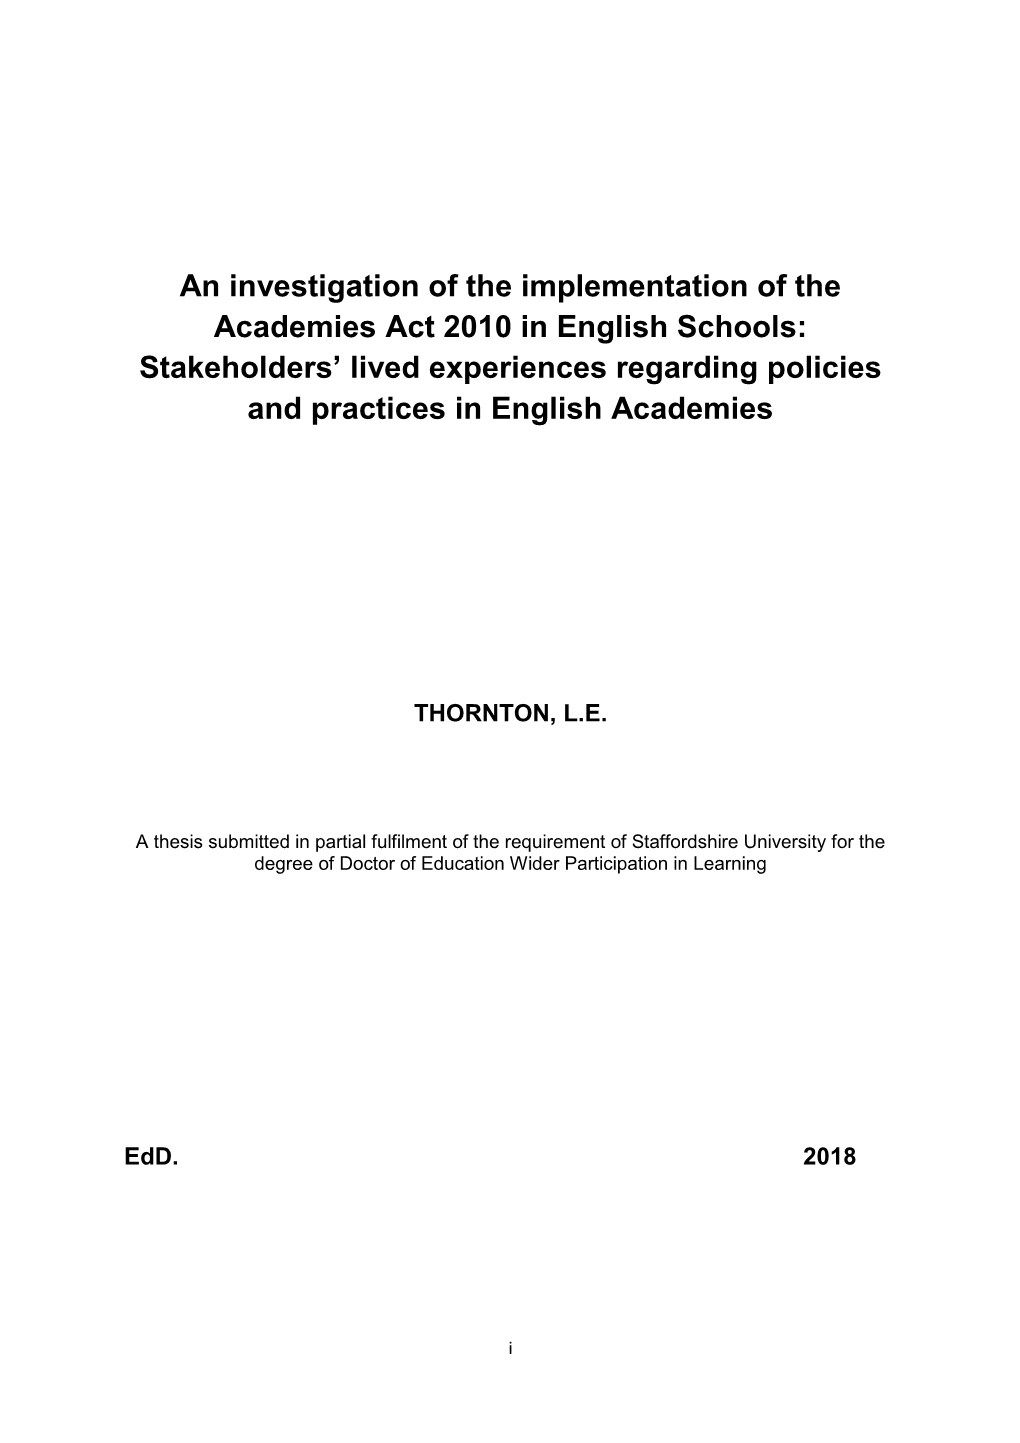 An Investigation of the Implementation of the Academies Act 2010 in English Schools